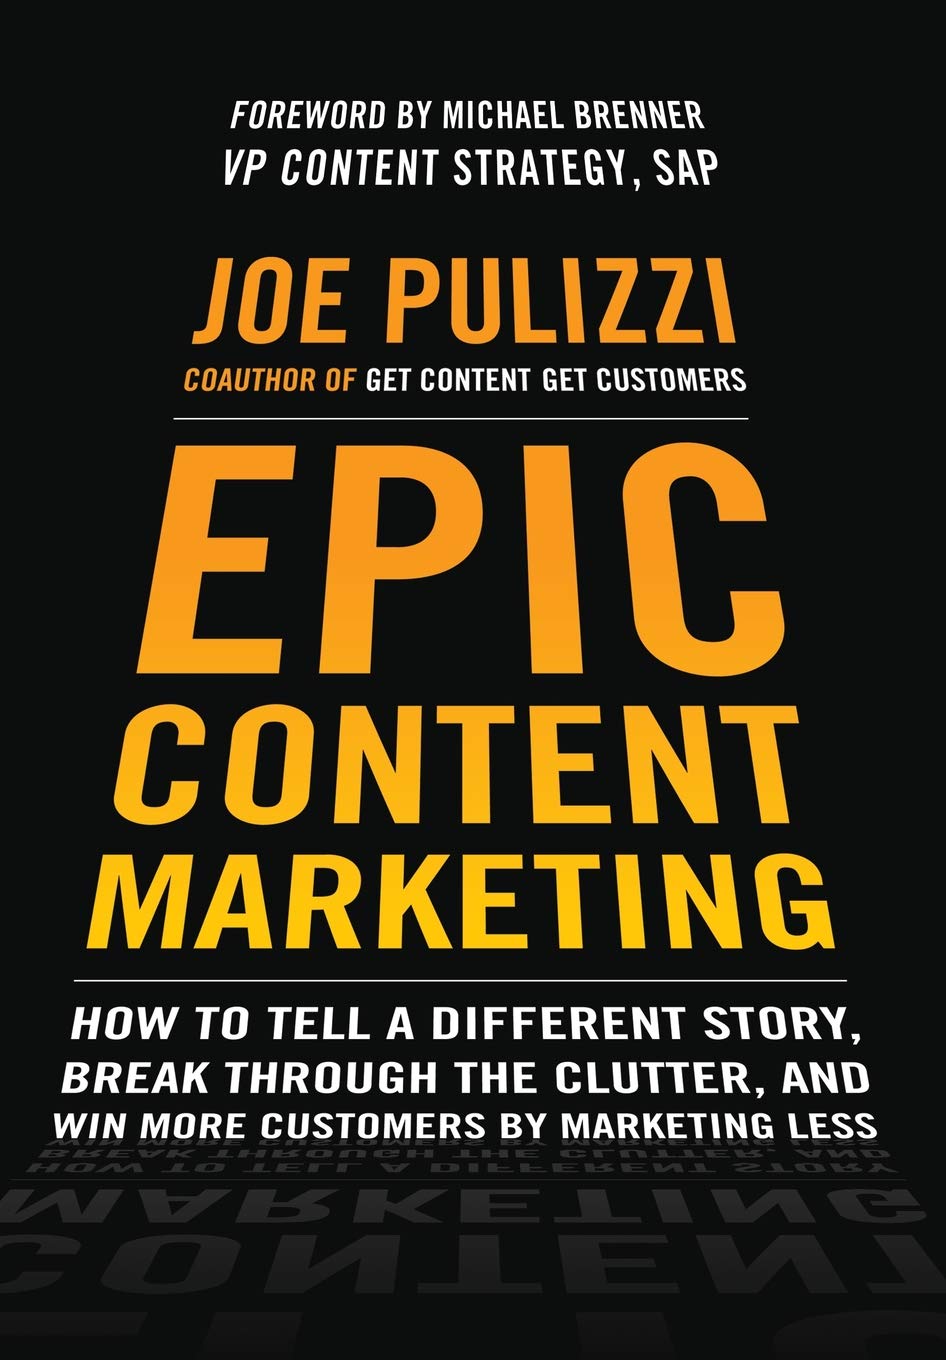 Epic Content Marketing: How to Tell a Different Story, Break through the Clutter, and Win More Customers by Marketing Less by Joe Pulizzi